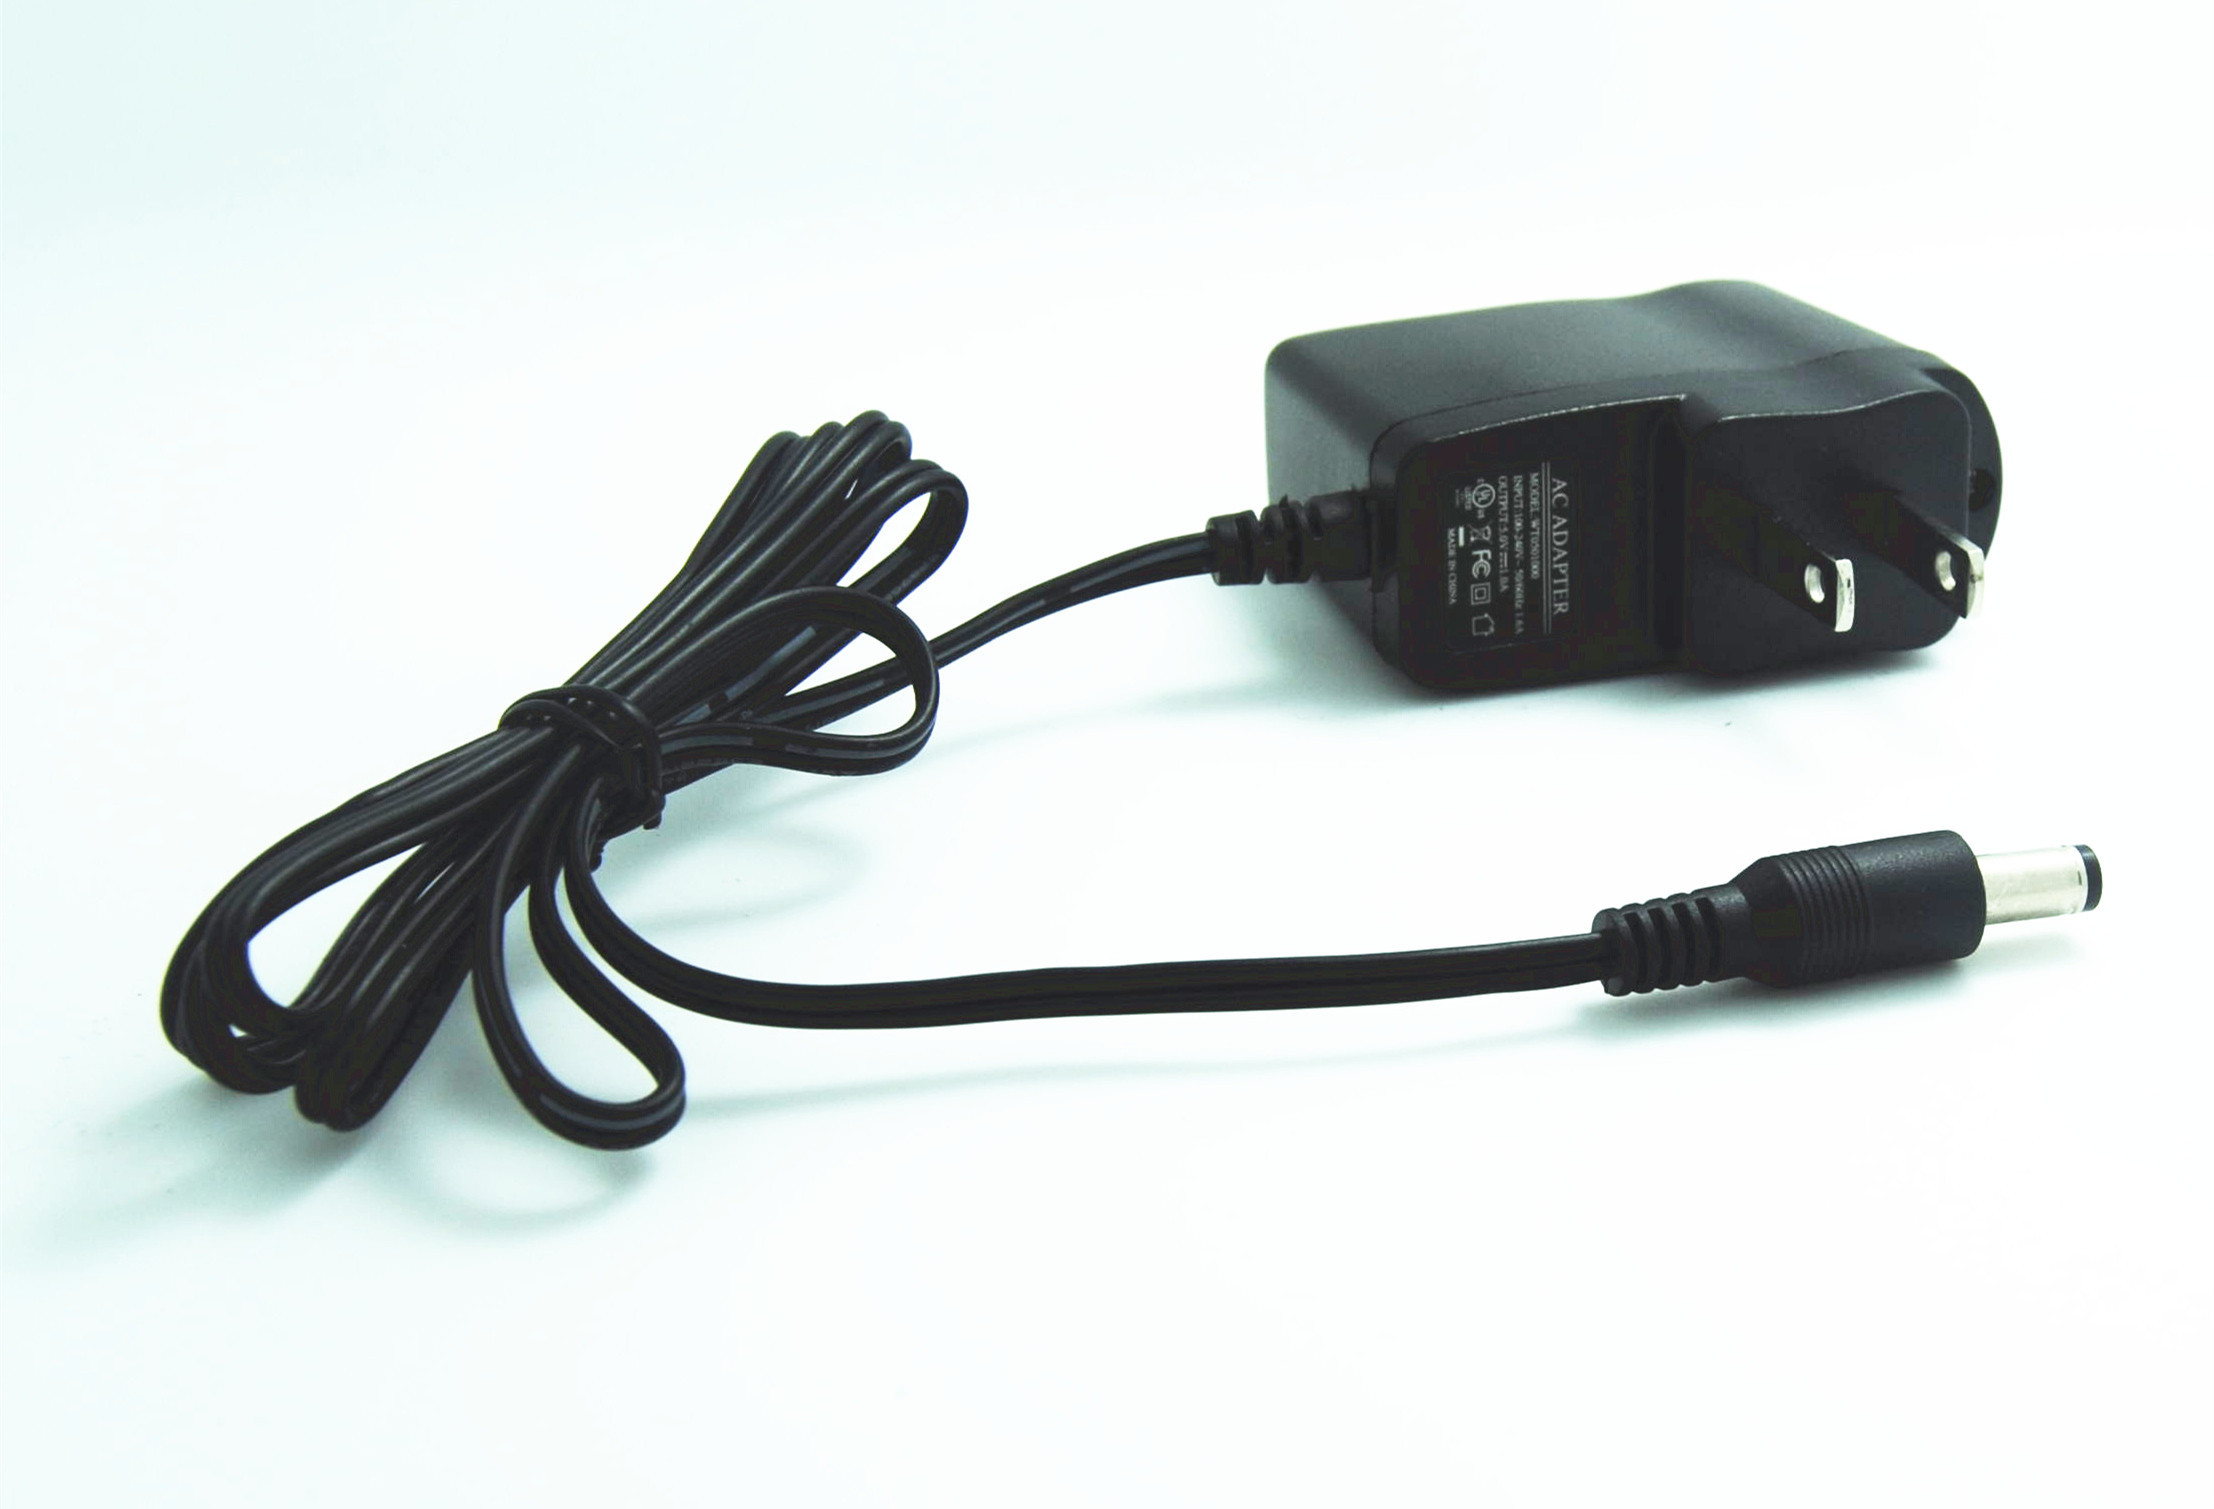 American LED Light Wall Mount Power Adapter , Foreign Power Adapters